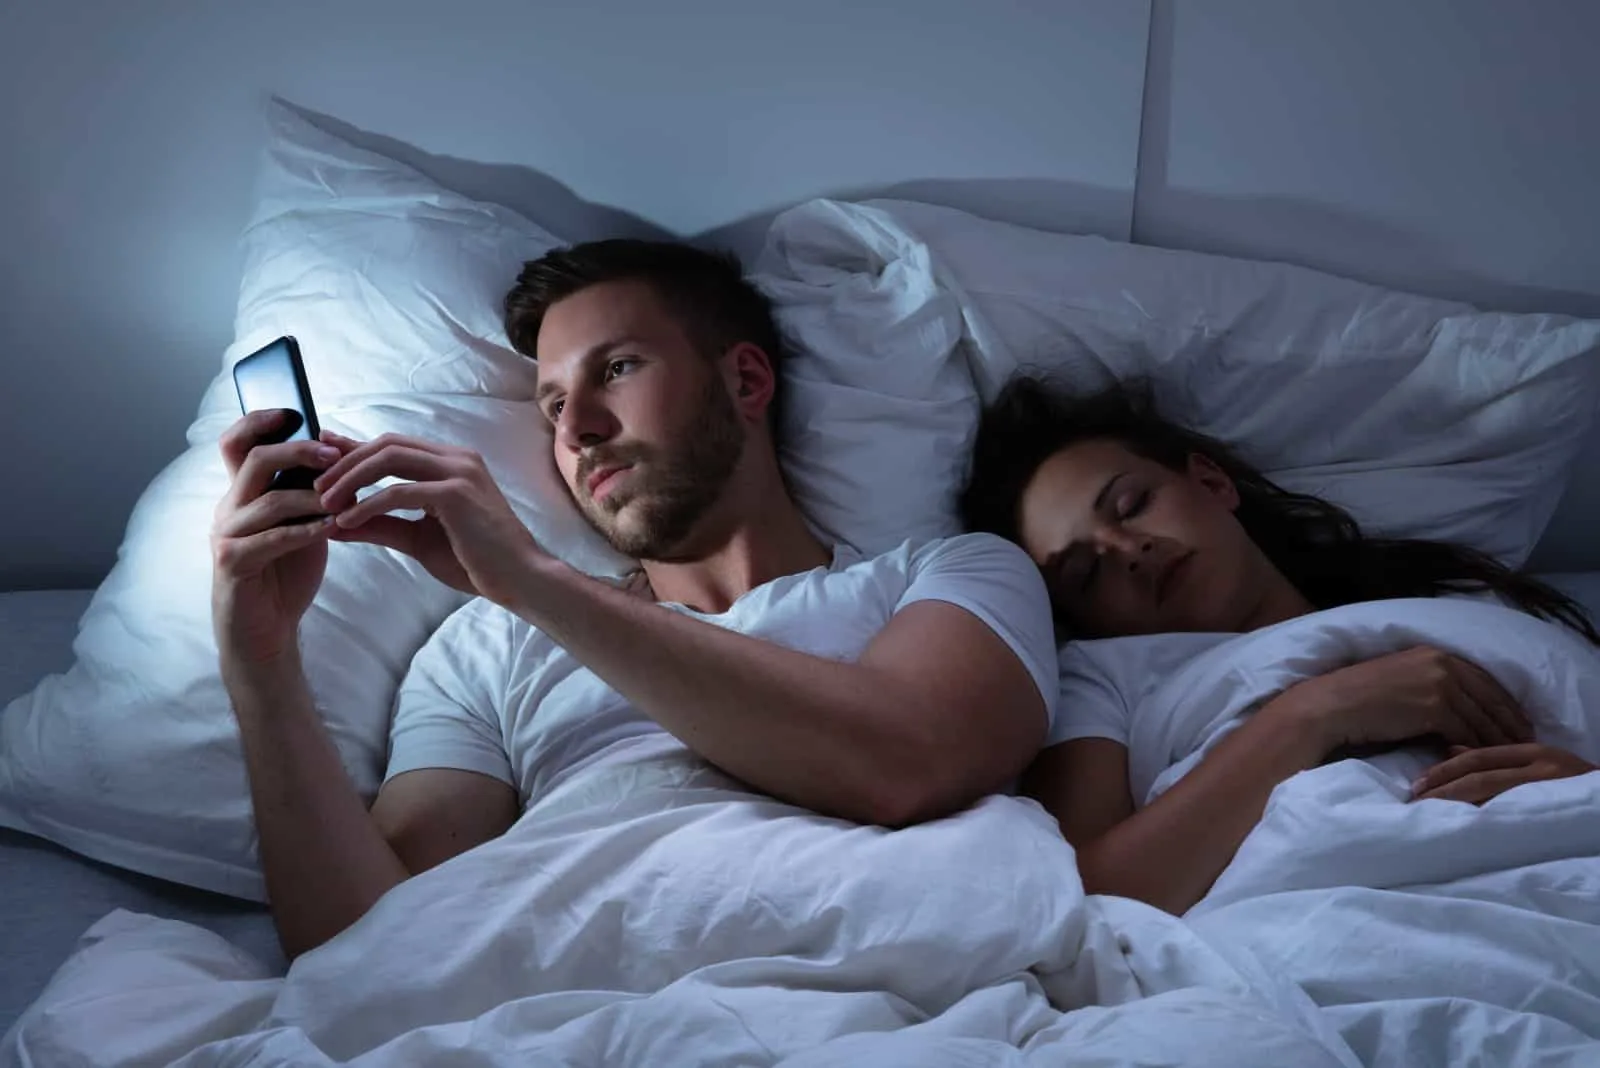 a man is texting while a woman is sleeping next to him